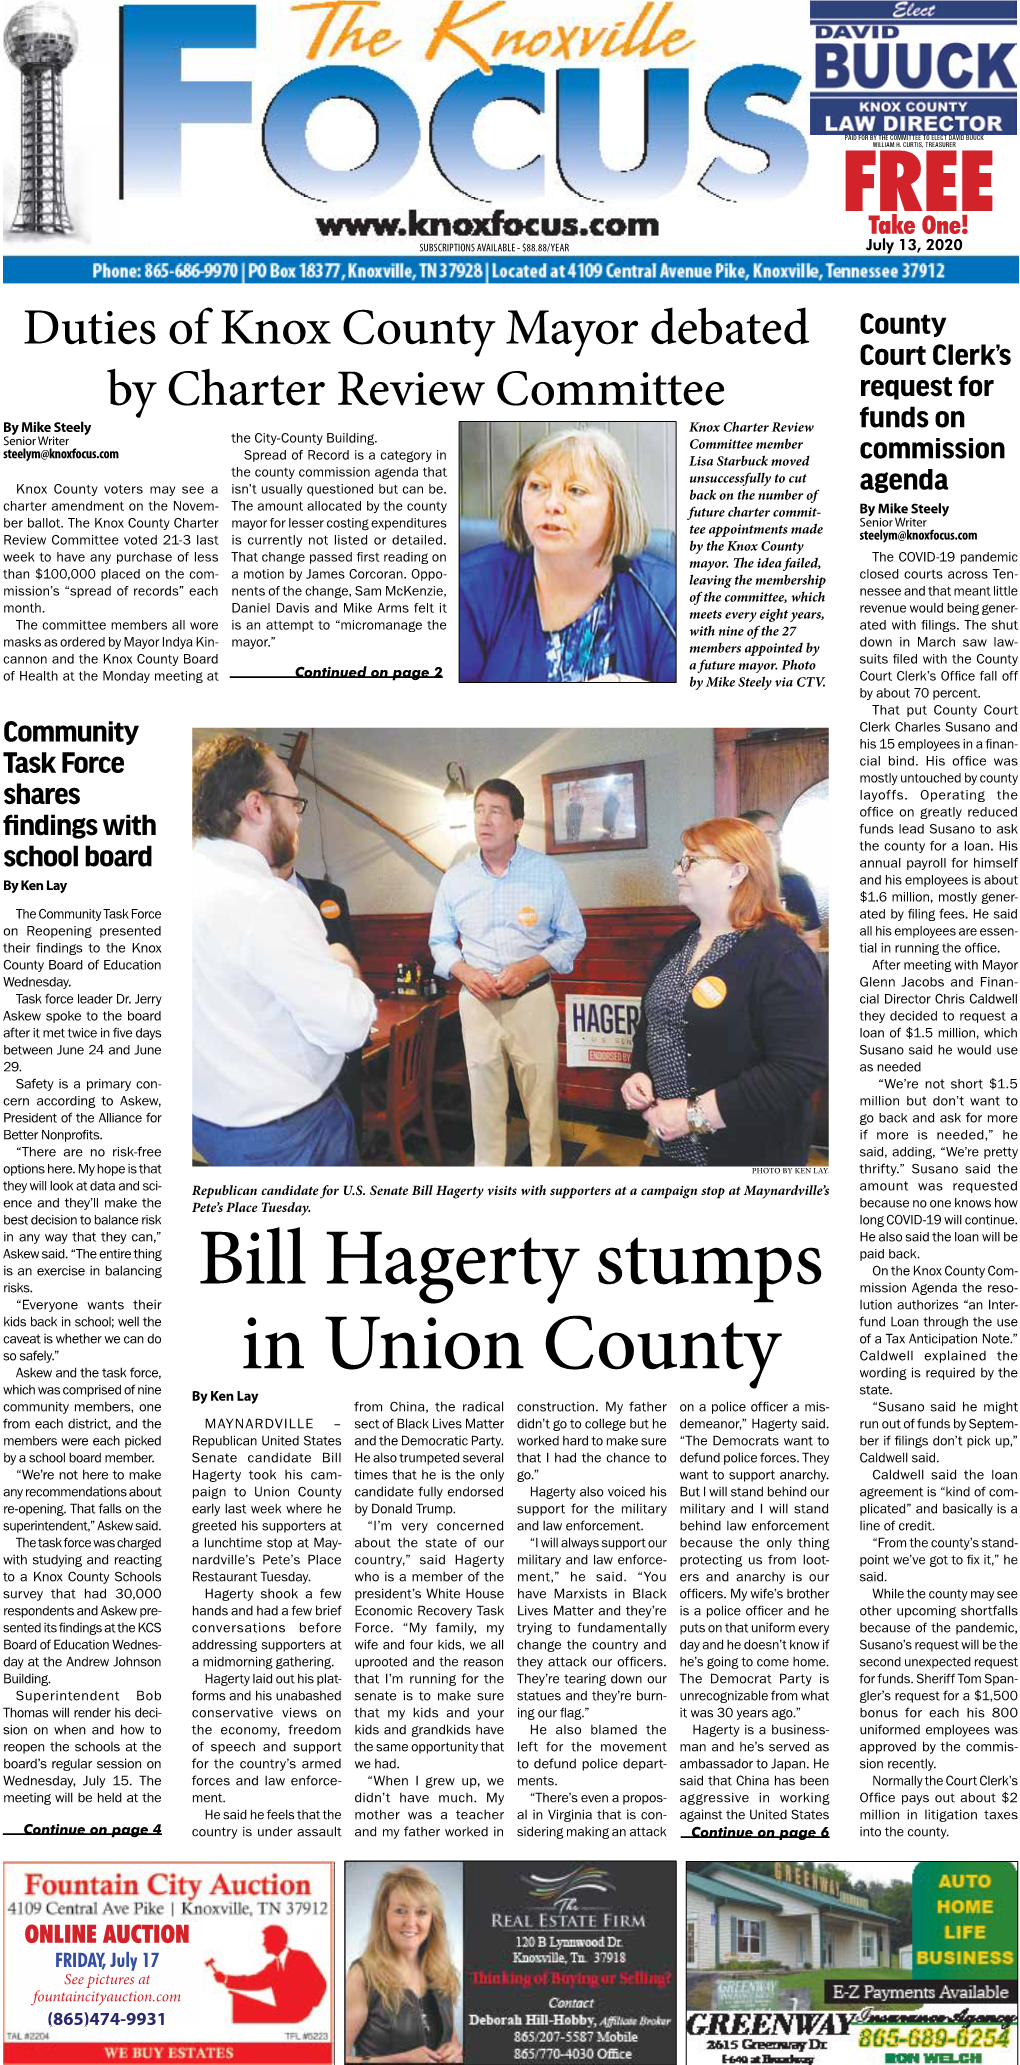 Bill Hagerty Stumps in Union County